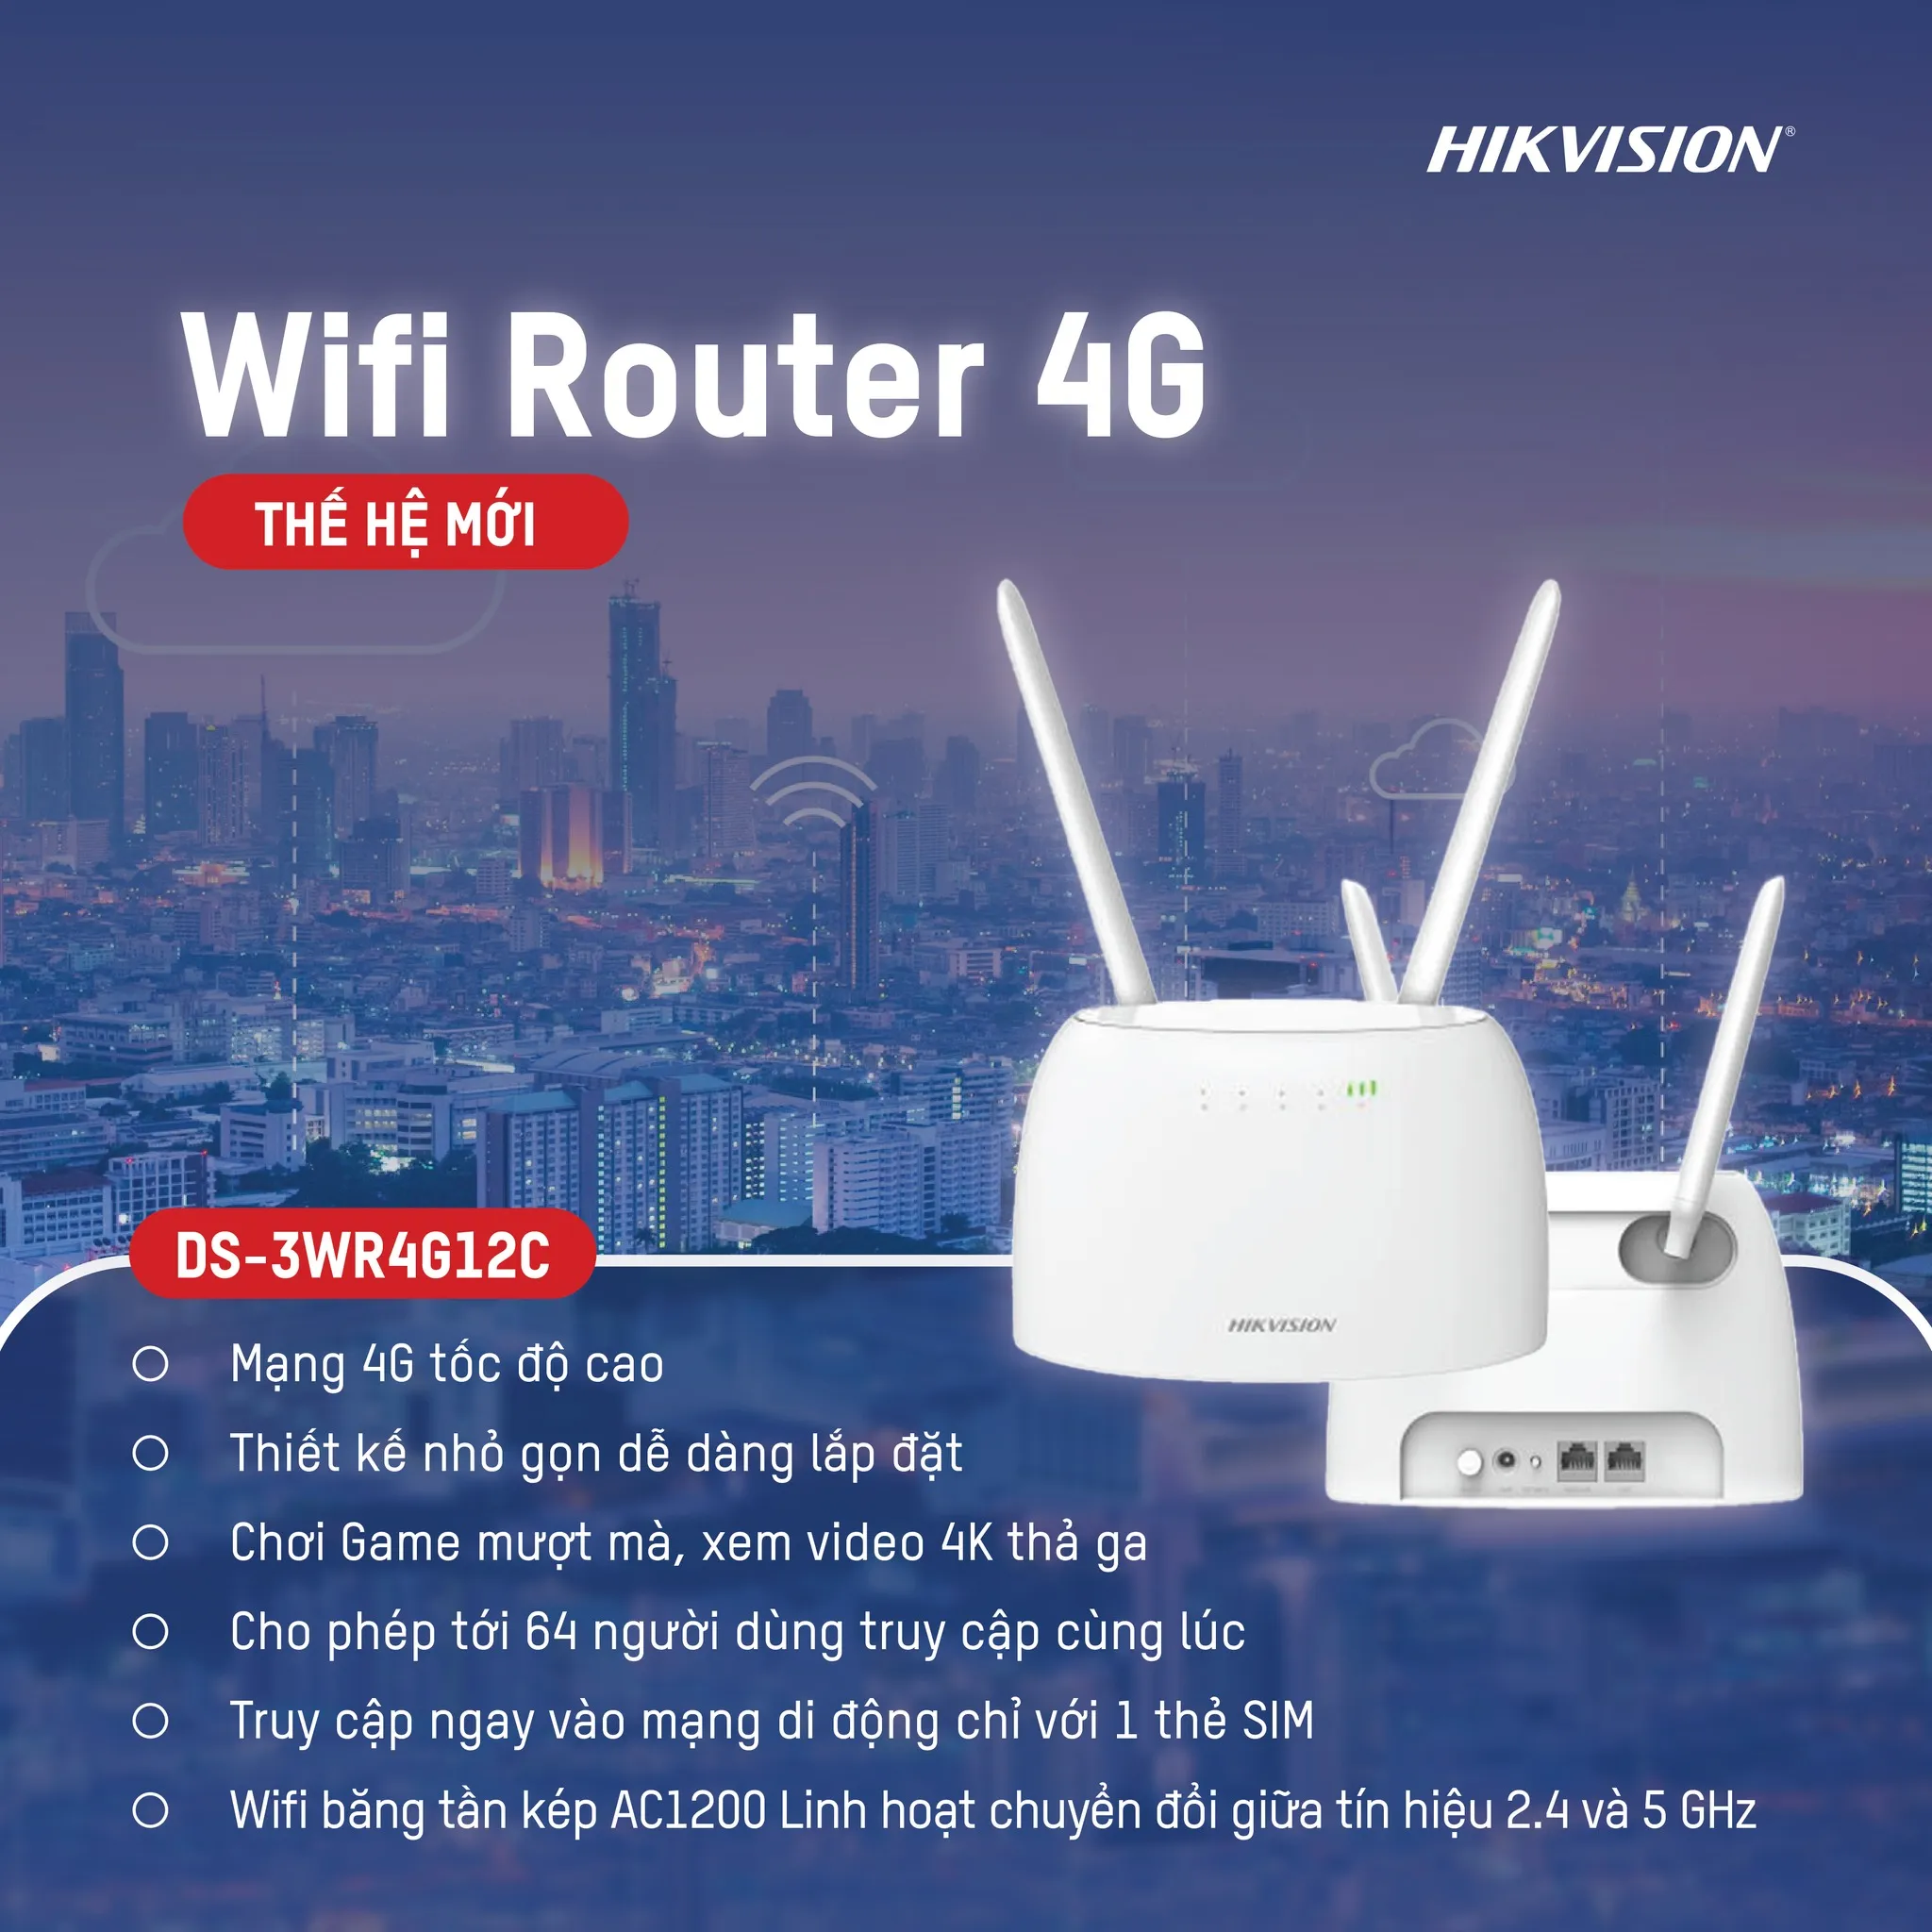 Wifi Router 4G thế hệ mới của Hikvision